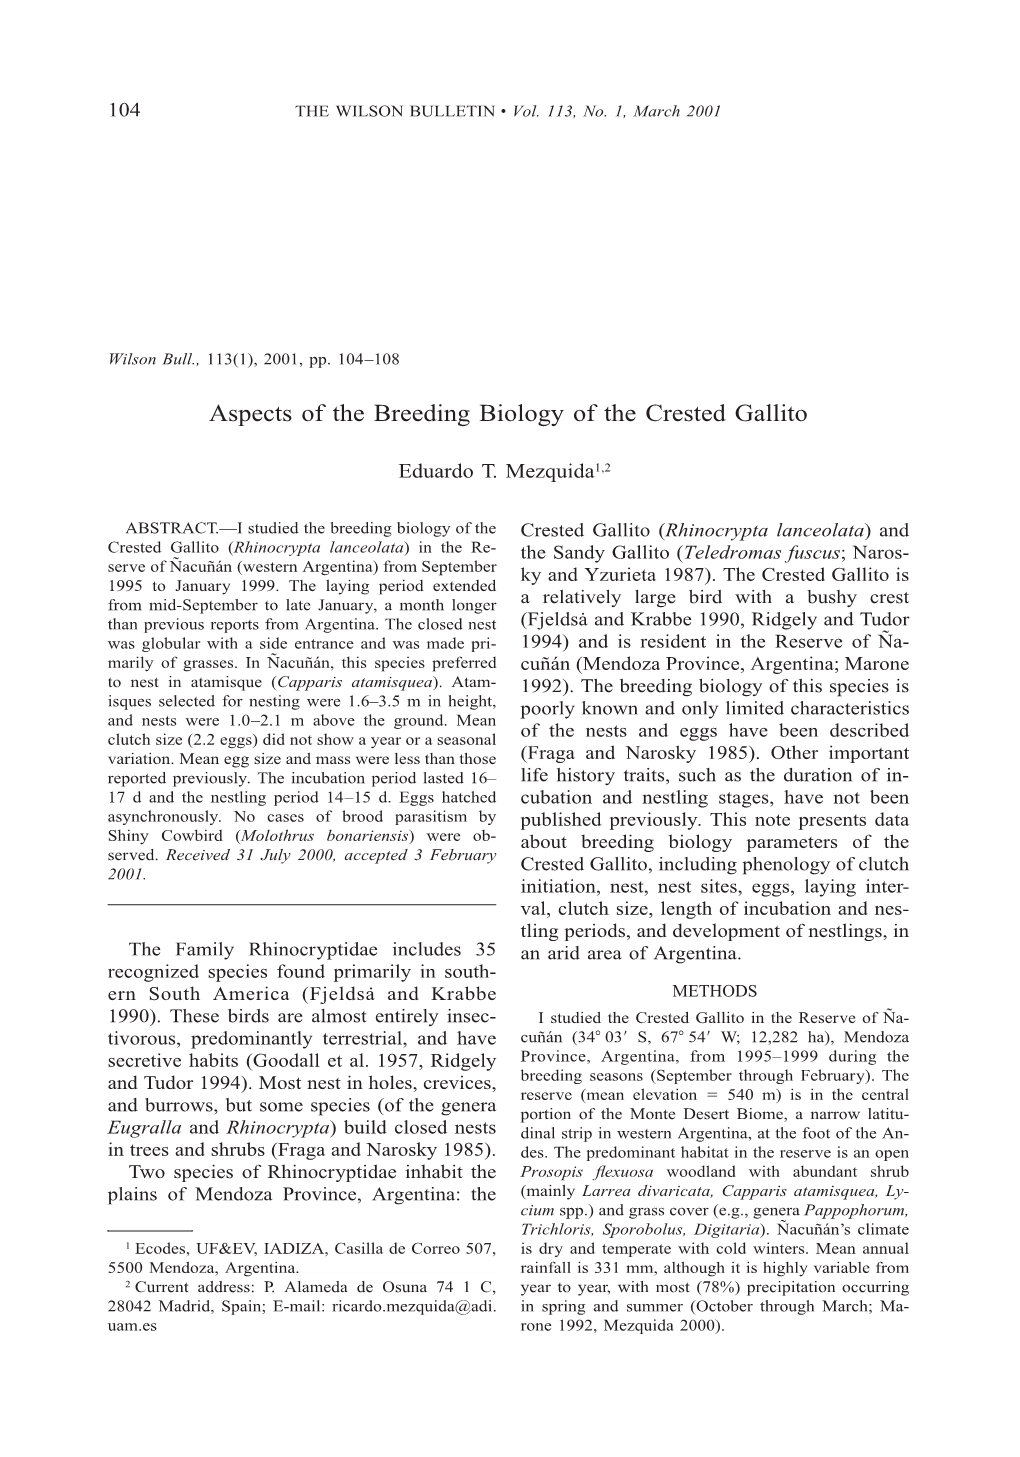 Aspects of the Breeding Biology of the Crested Gallito